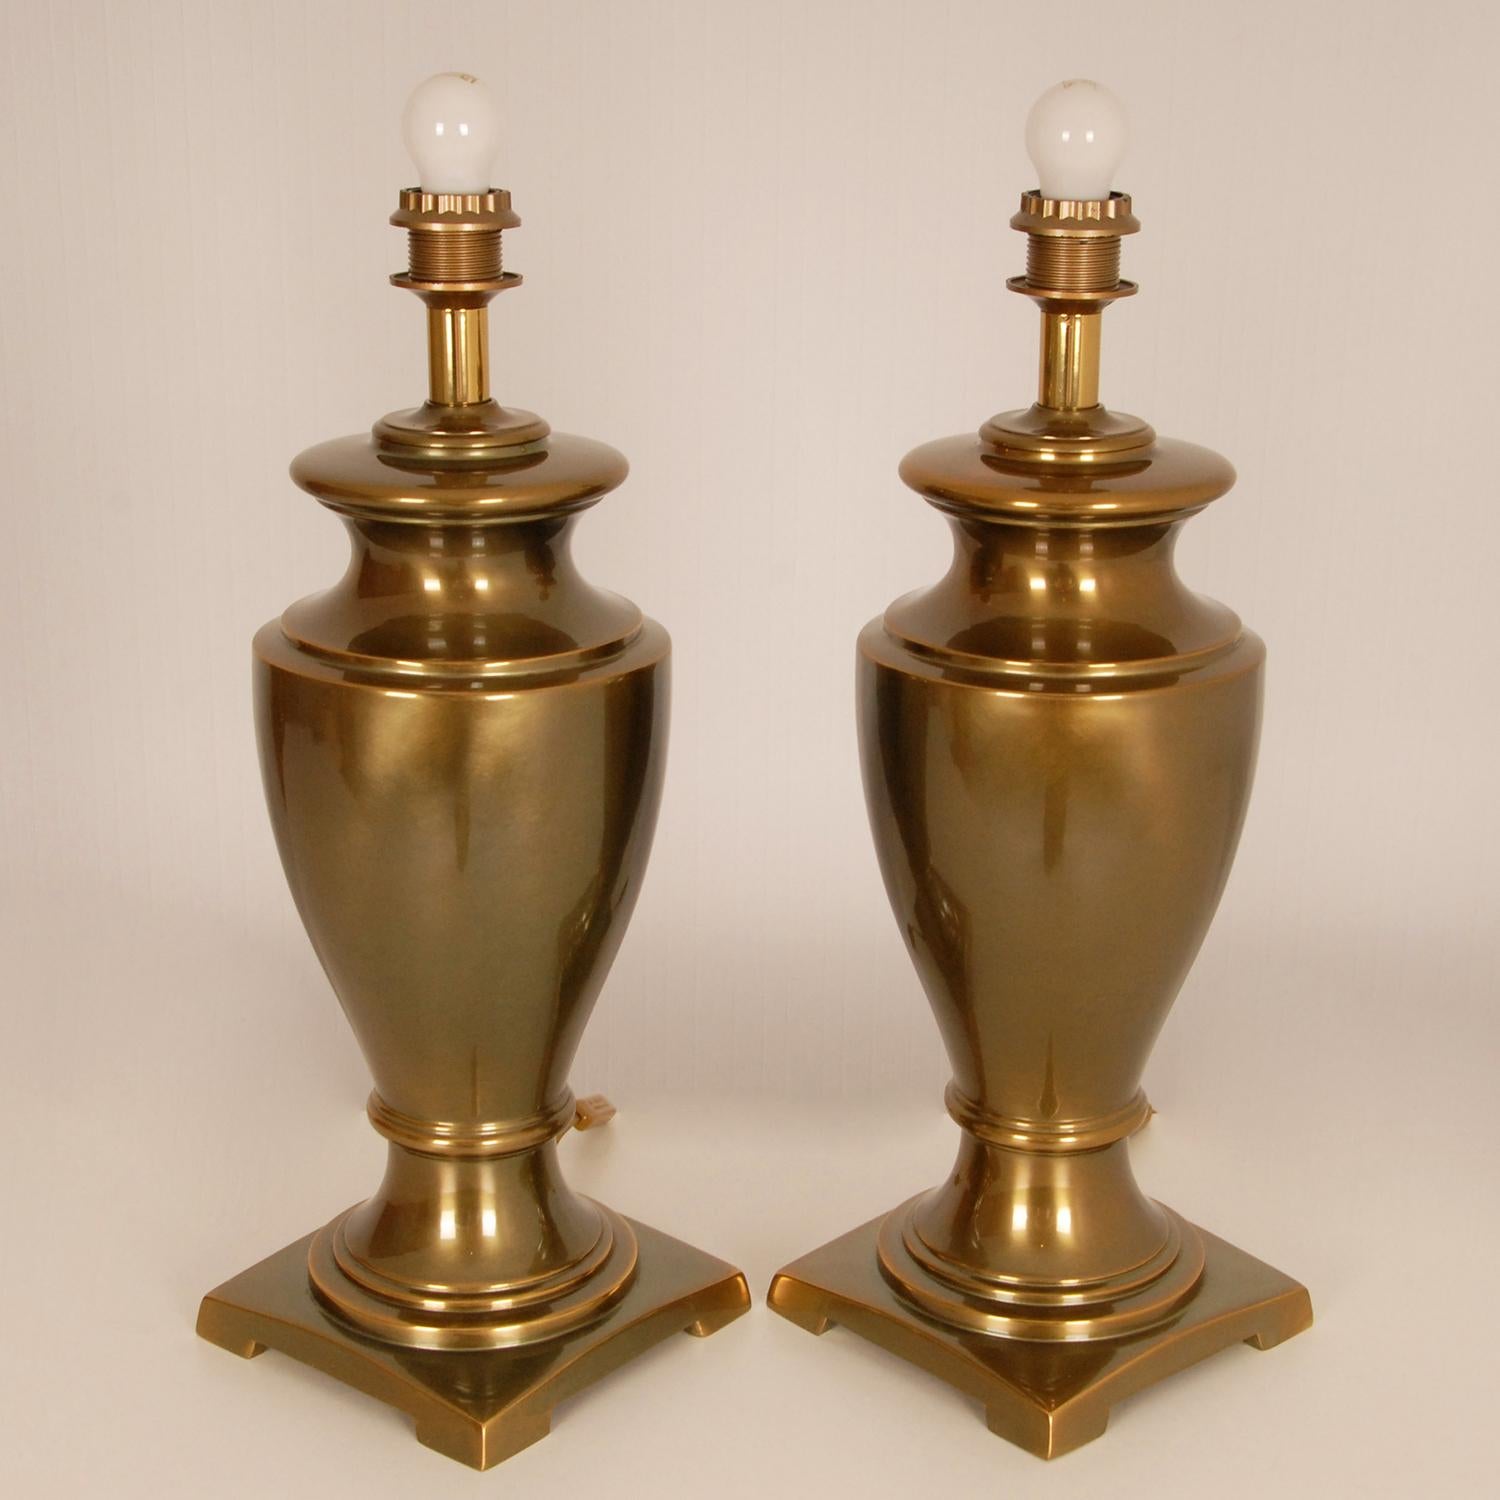 Vintage luxury gold gilded brass classic table lamps - vase lamps.
The high quality vases are made of cast brass and stand on a square vase.
Origin Europe France 1970s - 1979
Style neoclassical
The lamps are in a good working condition
Cordcolor: